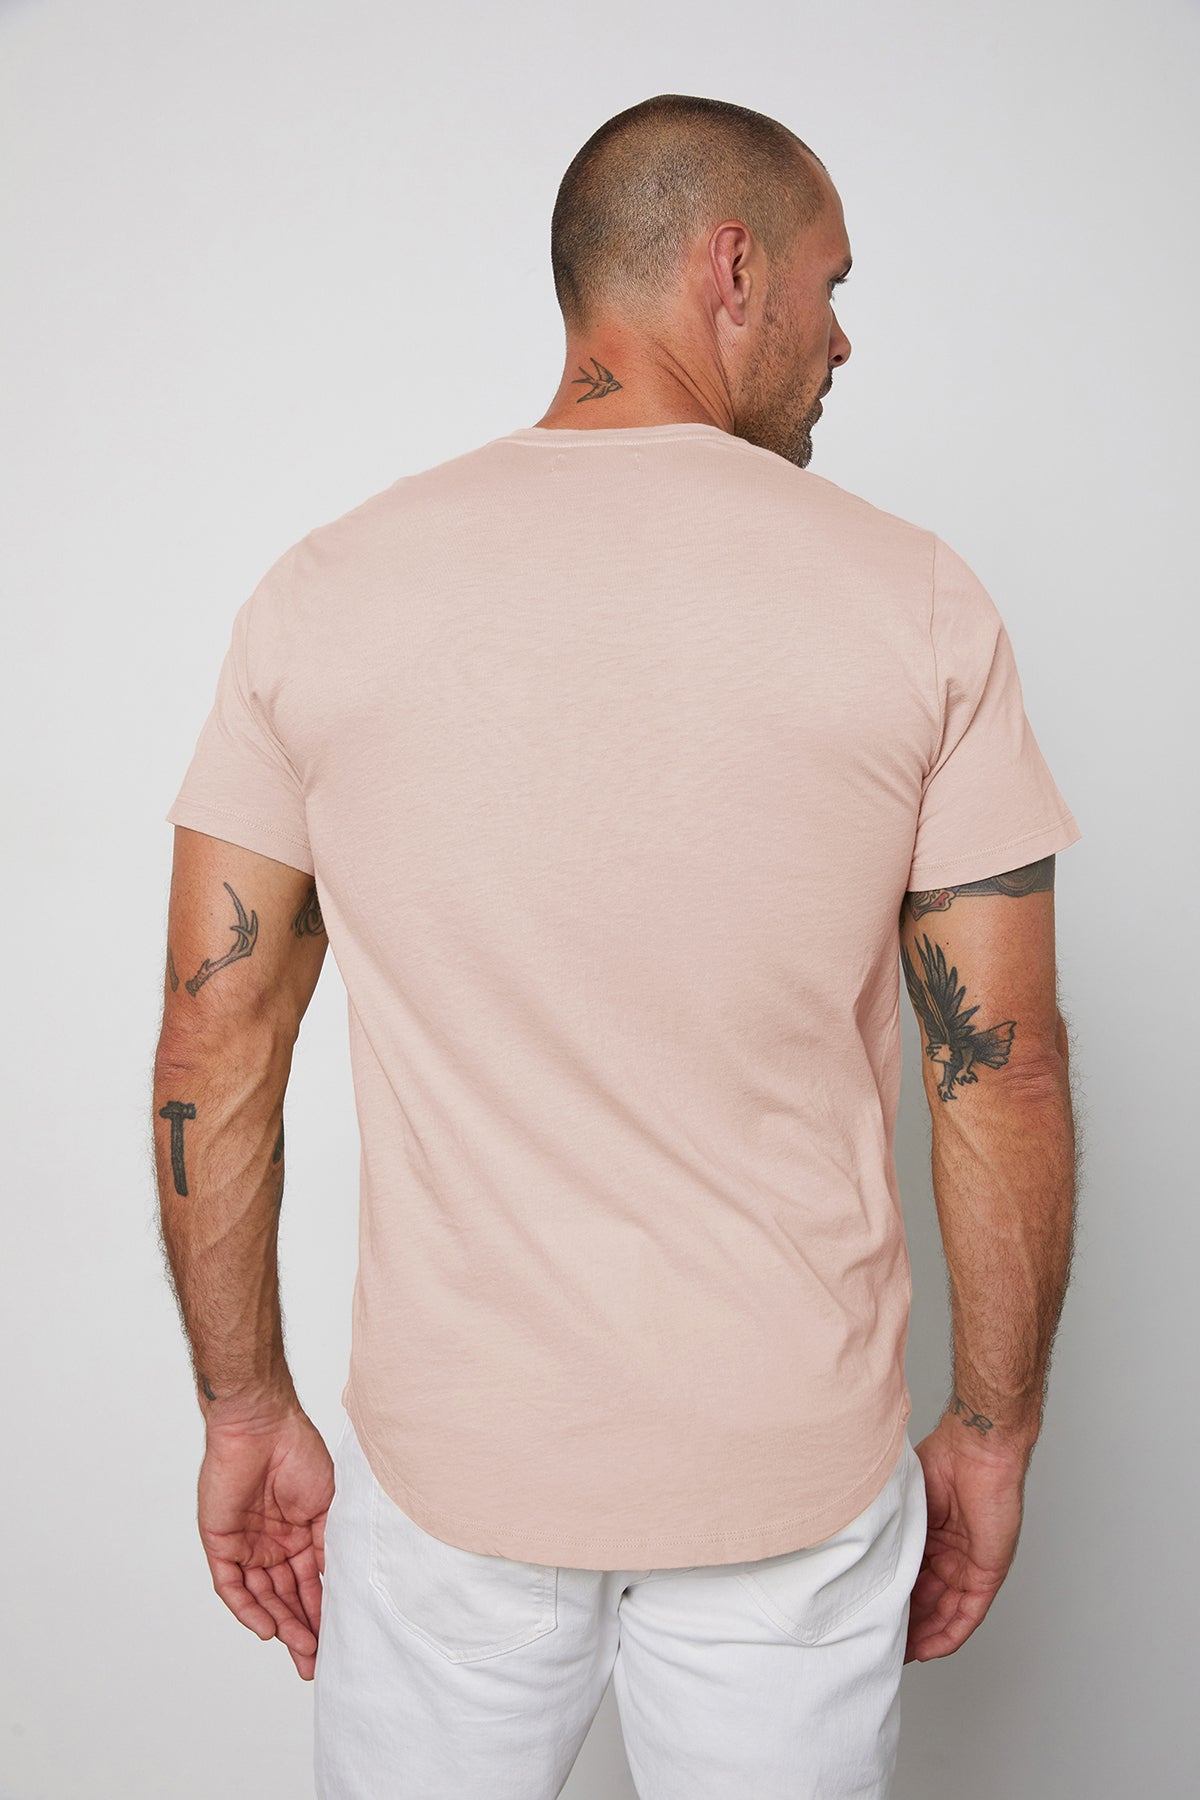 Fulton Short Sleeve Henley in light pink color bloom with white pants back view-35567477227713